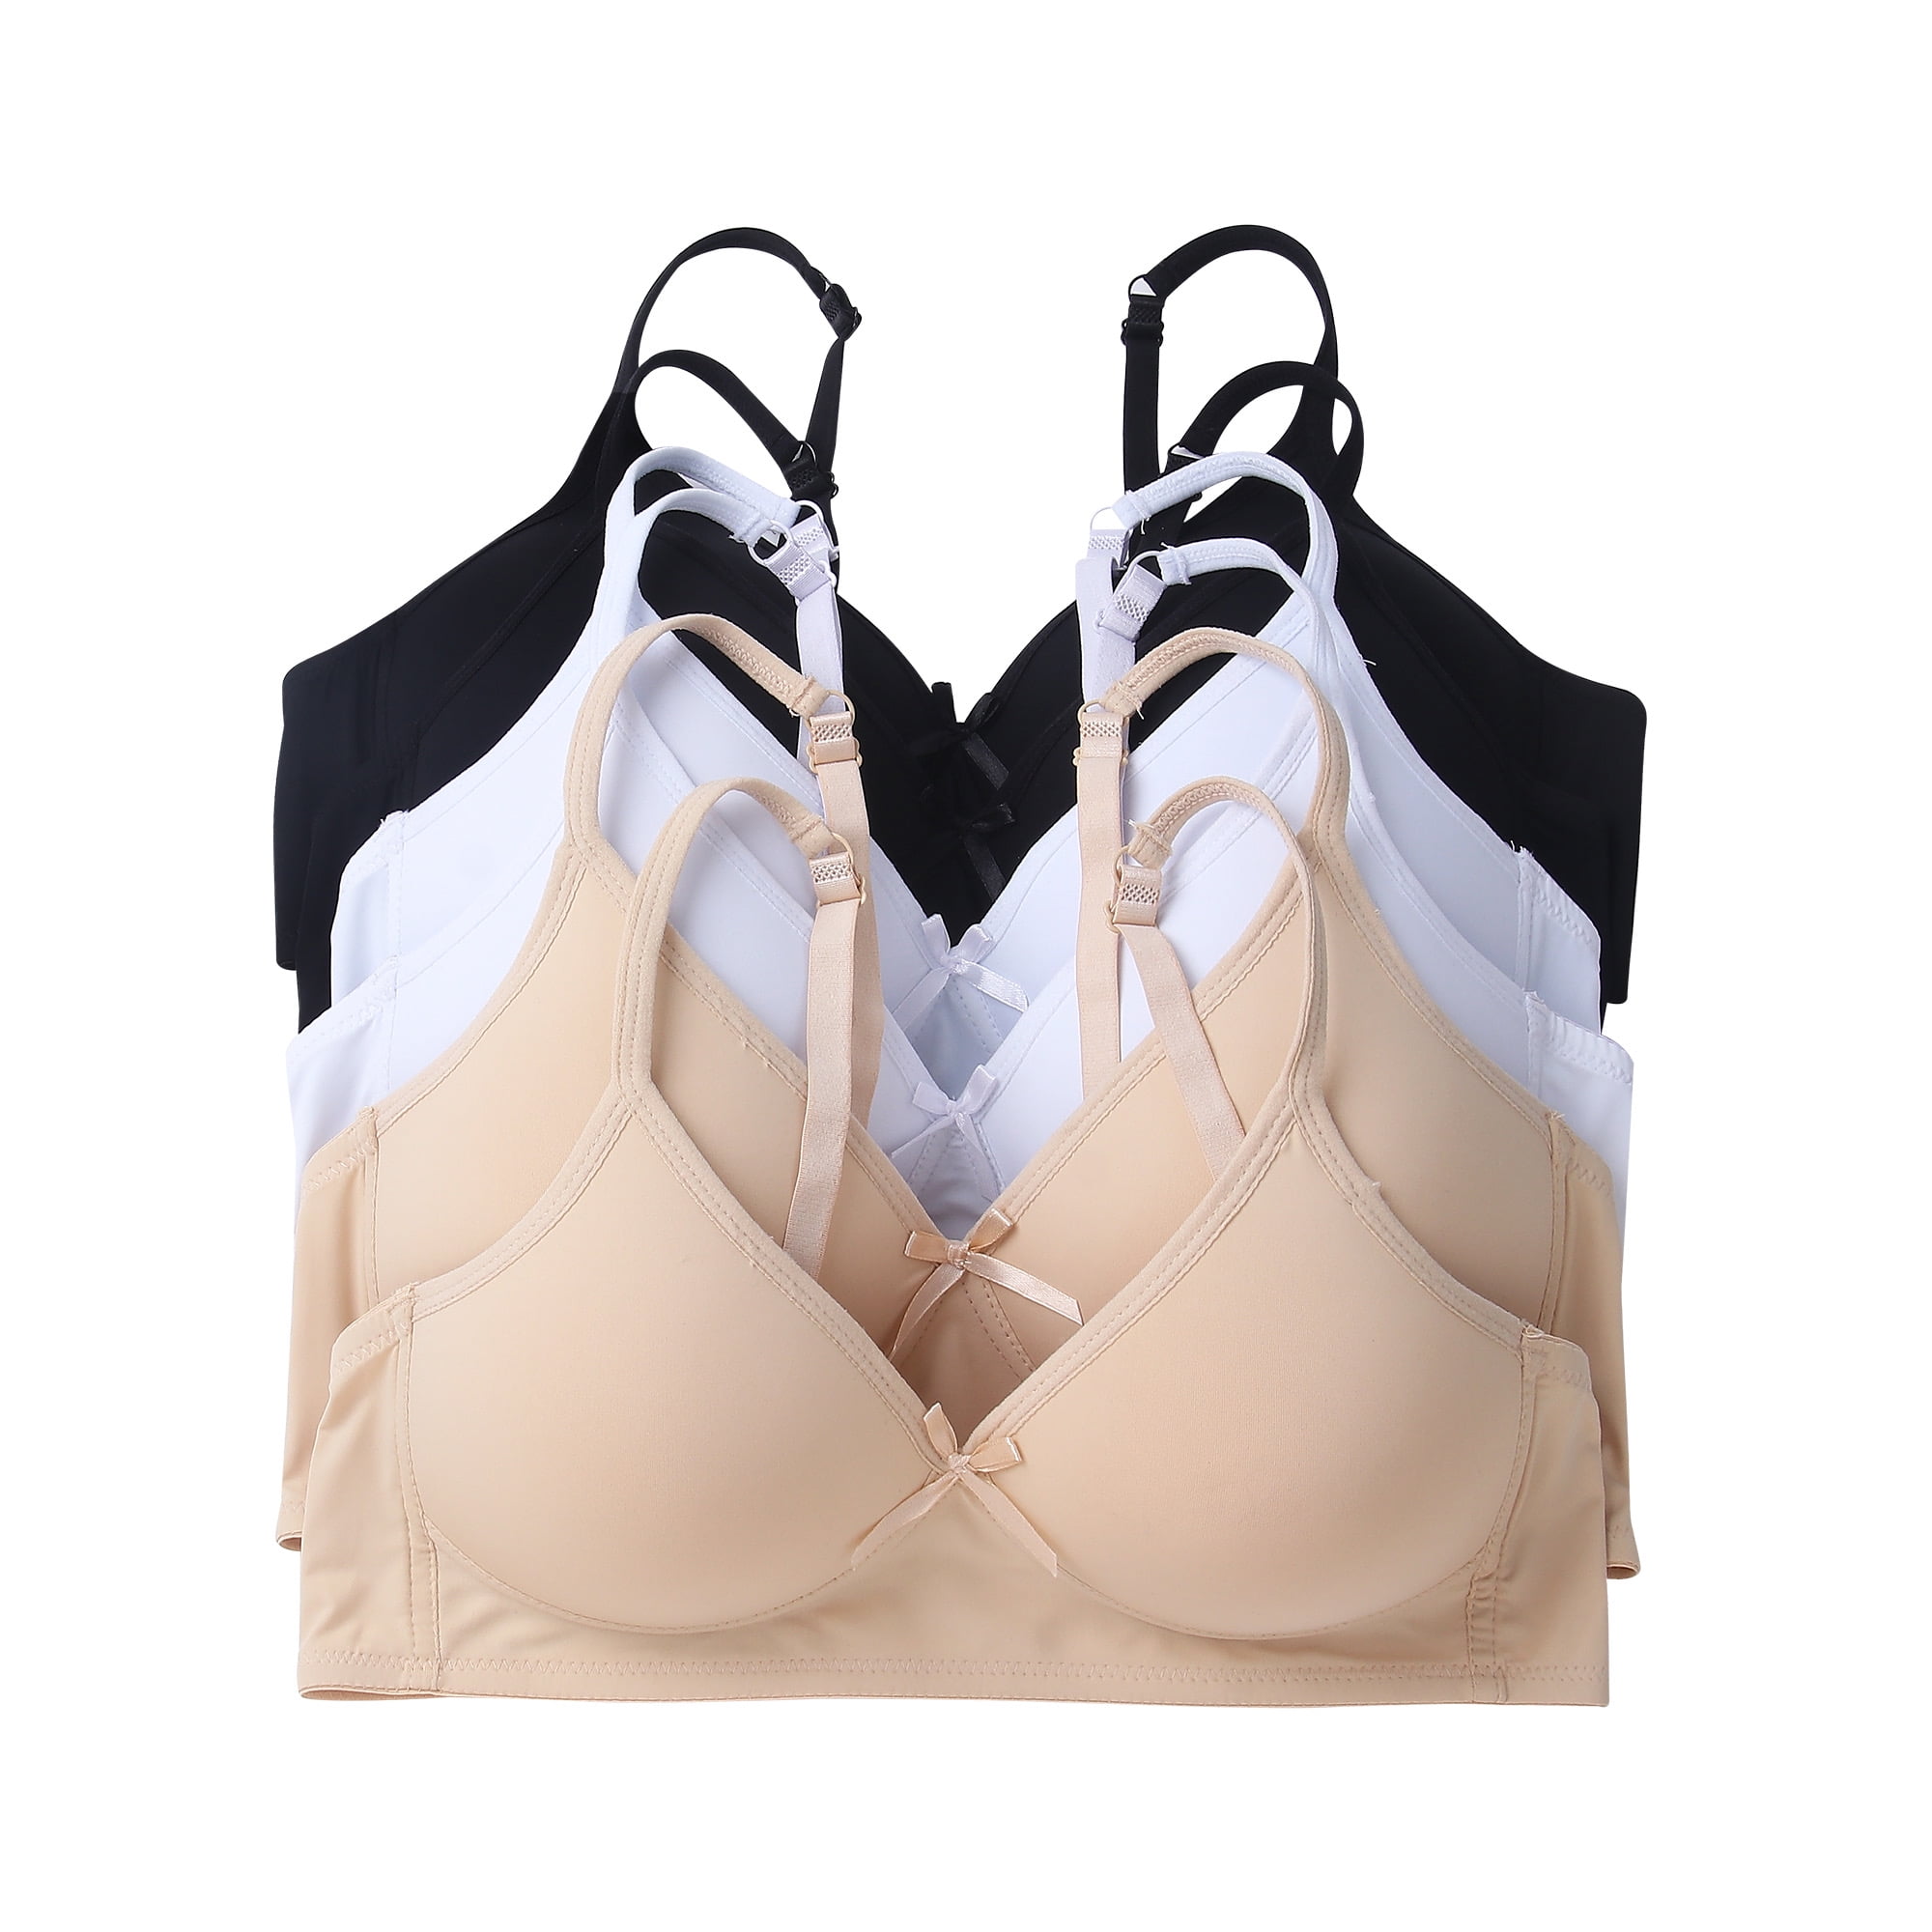 Women Bras 6 pack of No Wire Free Bra A cup B cup C cup Size 34B (S6702) 